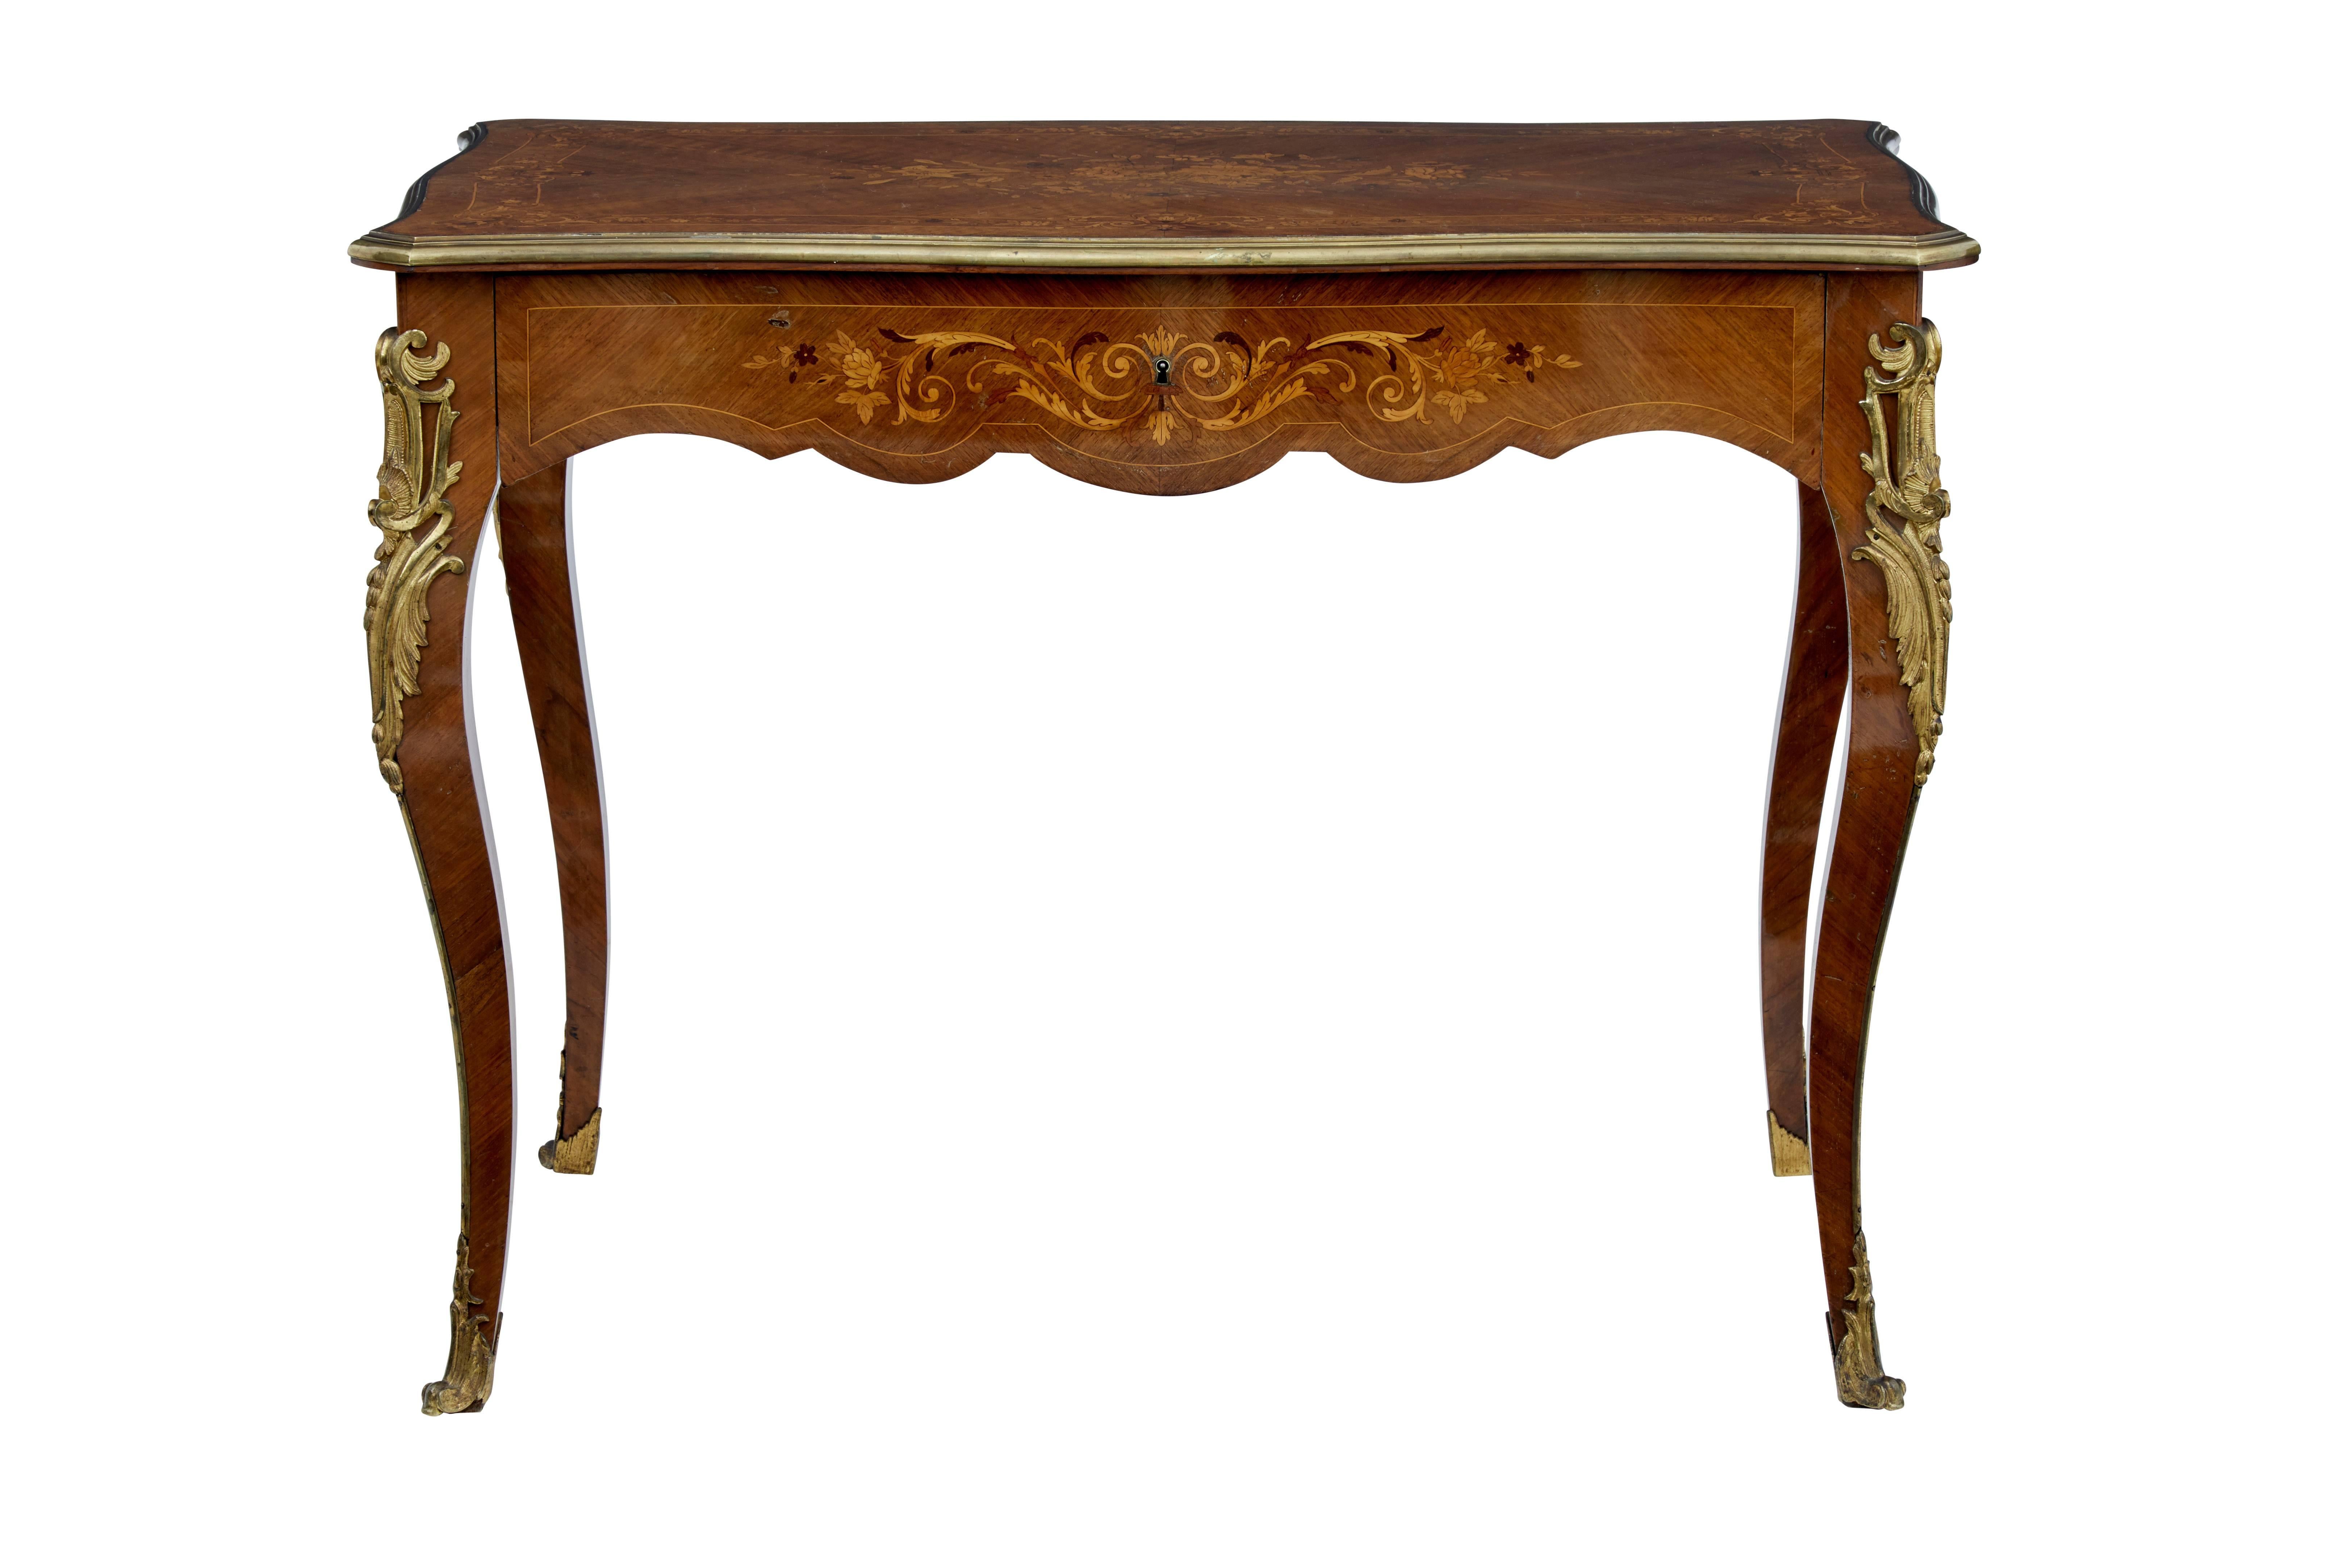 Fine quality French bureau plat of small proportions, circa 1870.
Beautifully inlaid to the top, drawer front, sides and reverse.
Freestanding in design, with ormolu mounts on the legs, feet and brass edging to the writing surface.
Single drawer